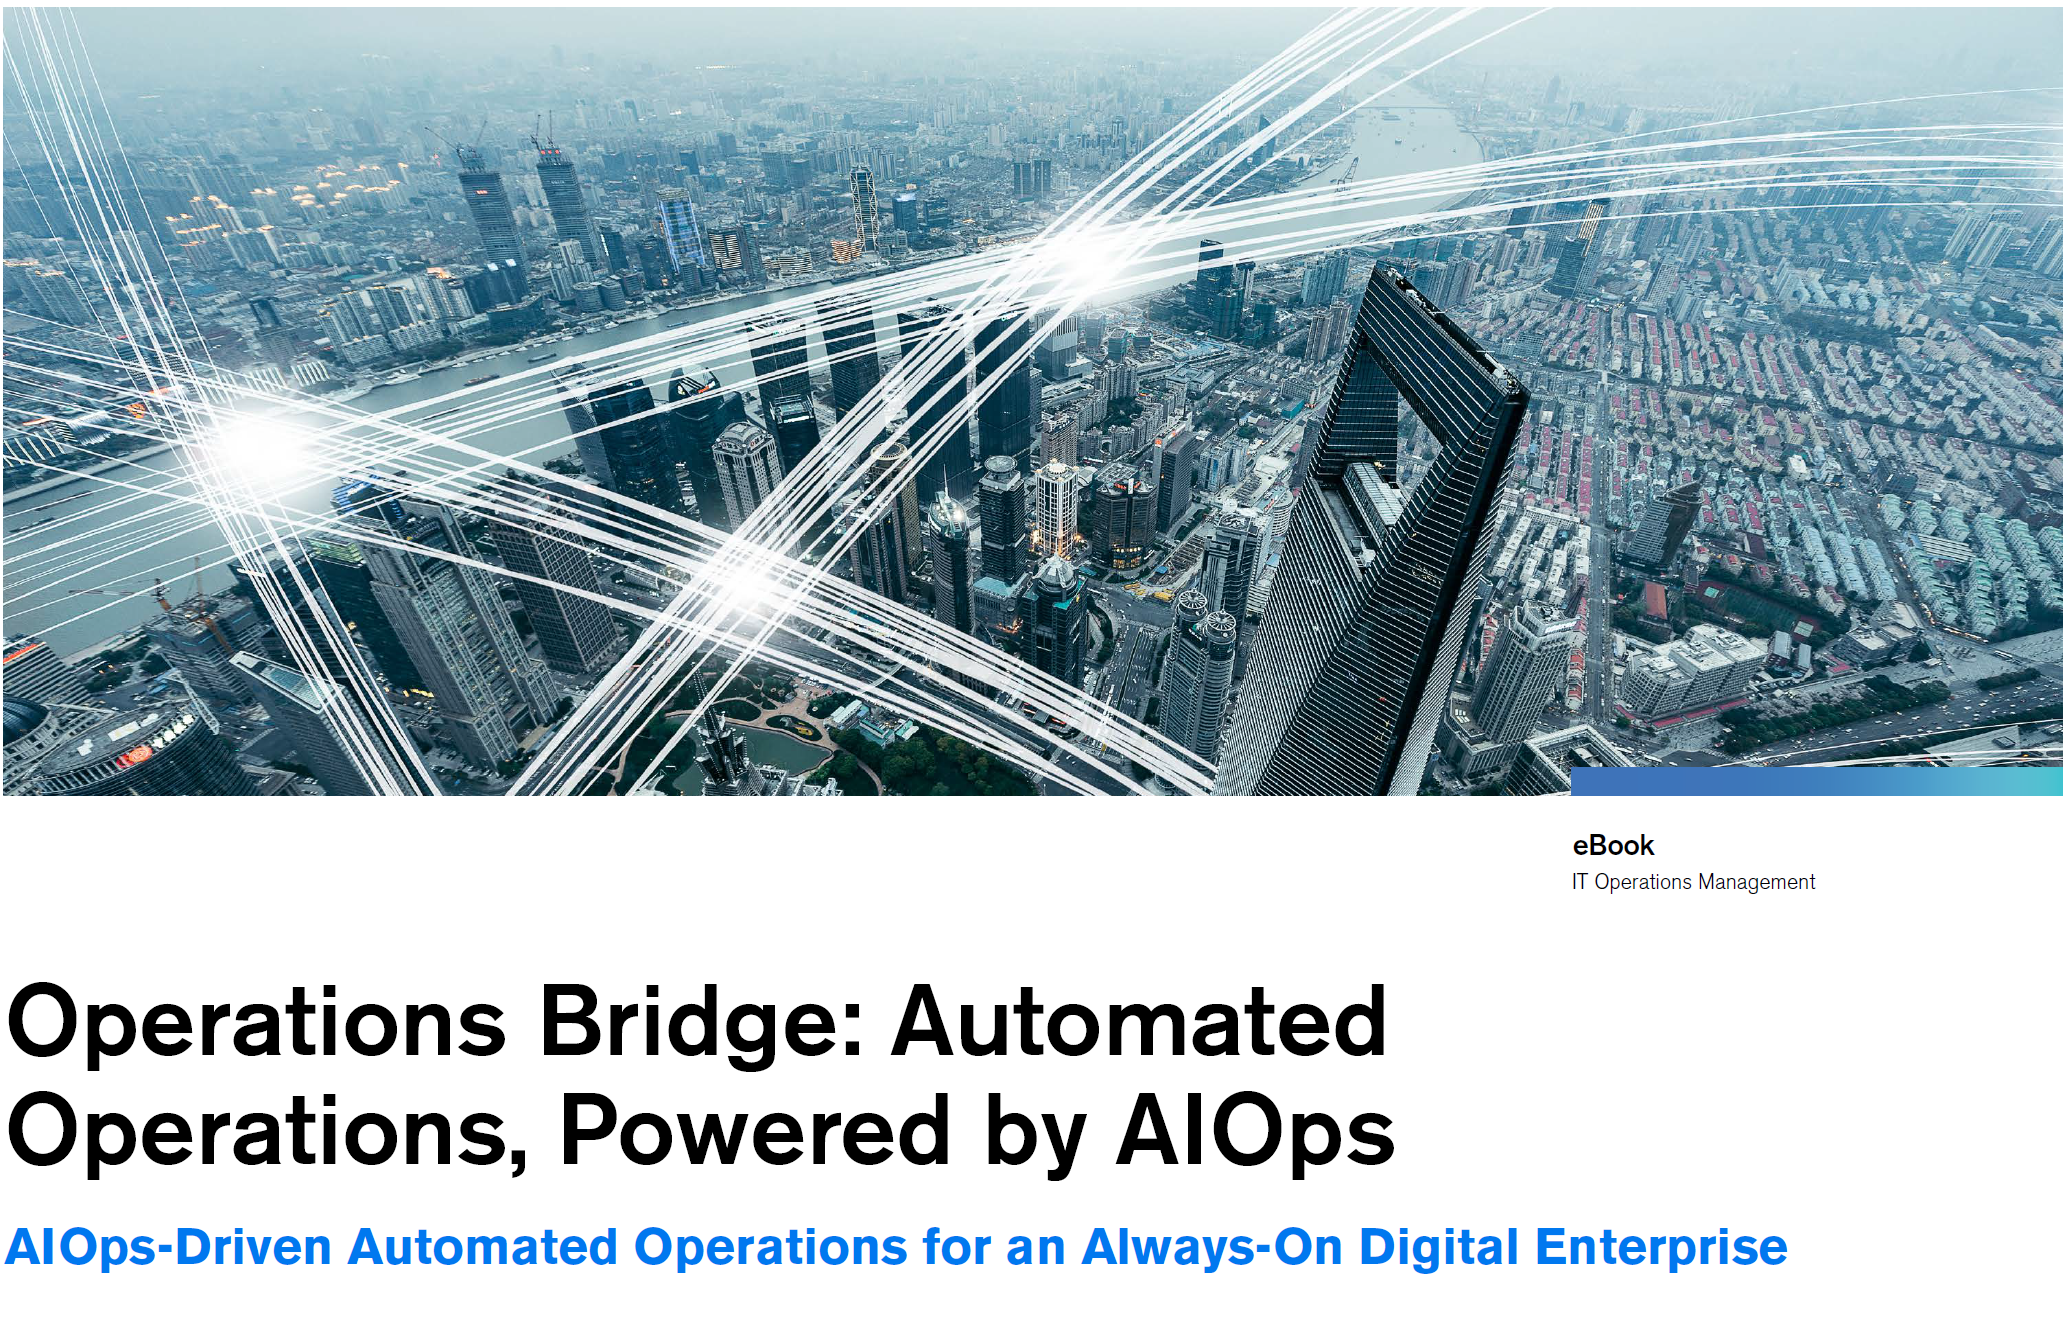 Operations Bridge: Automated Operations, Powered by AIOps